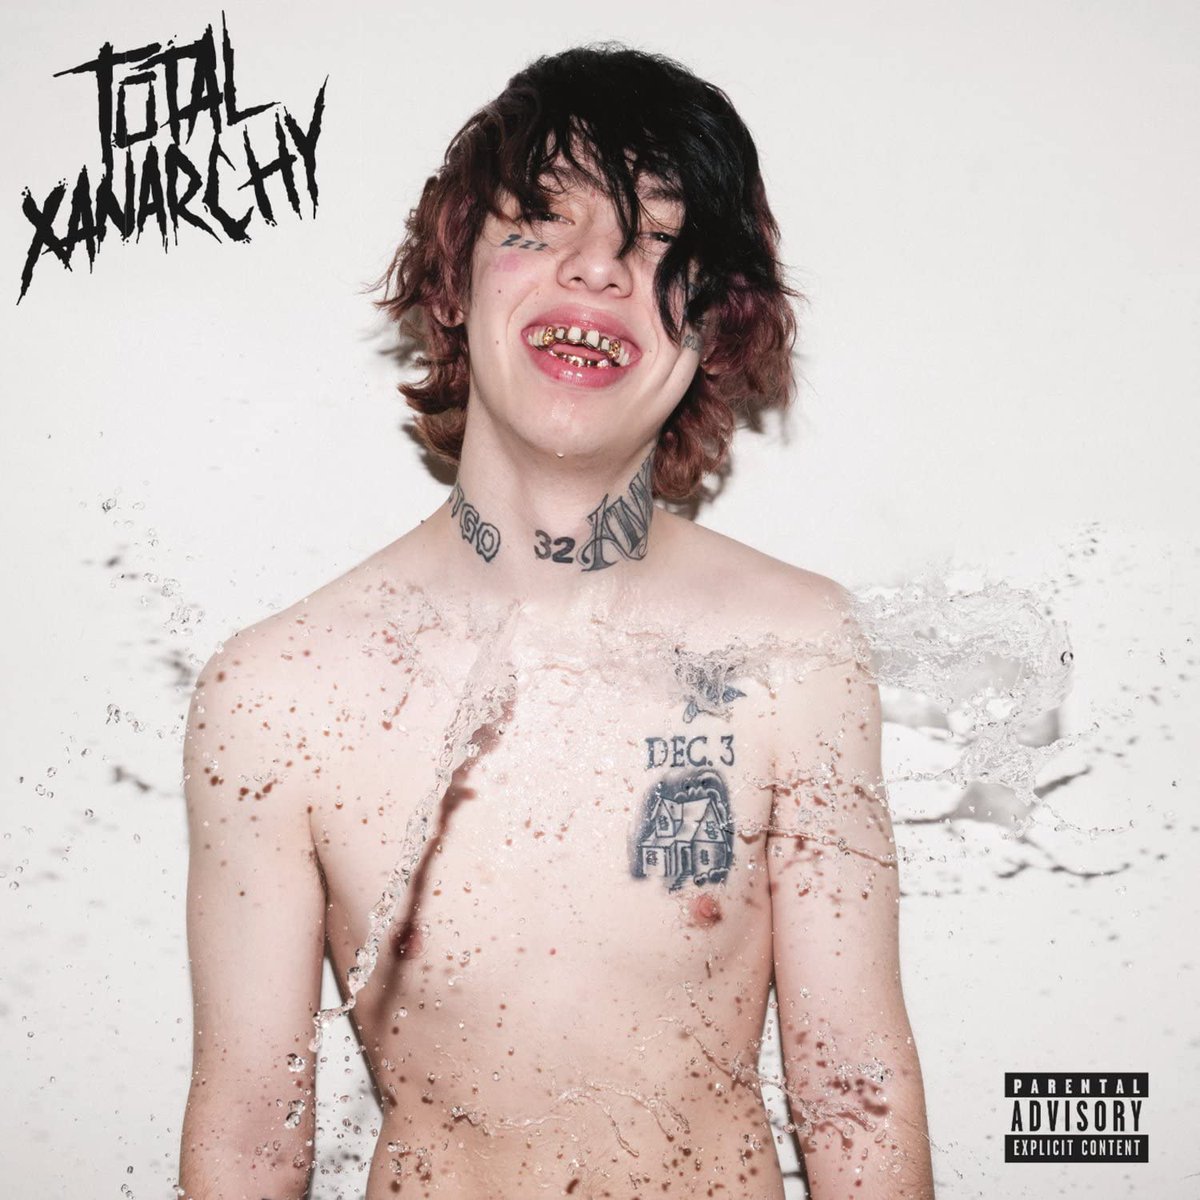 Total Xanarchy (2)There's nothing good about this album. It's just so trash that it makes me appreciate how good music can actually be.